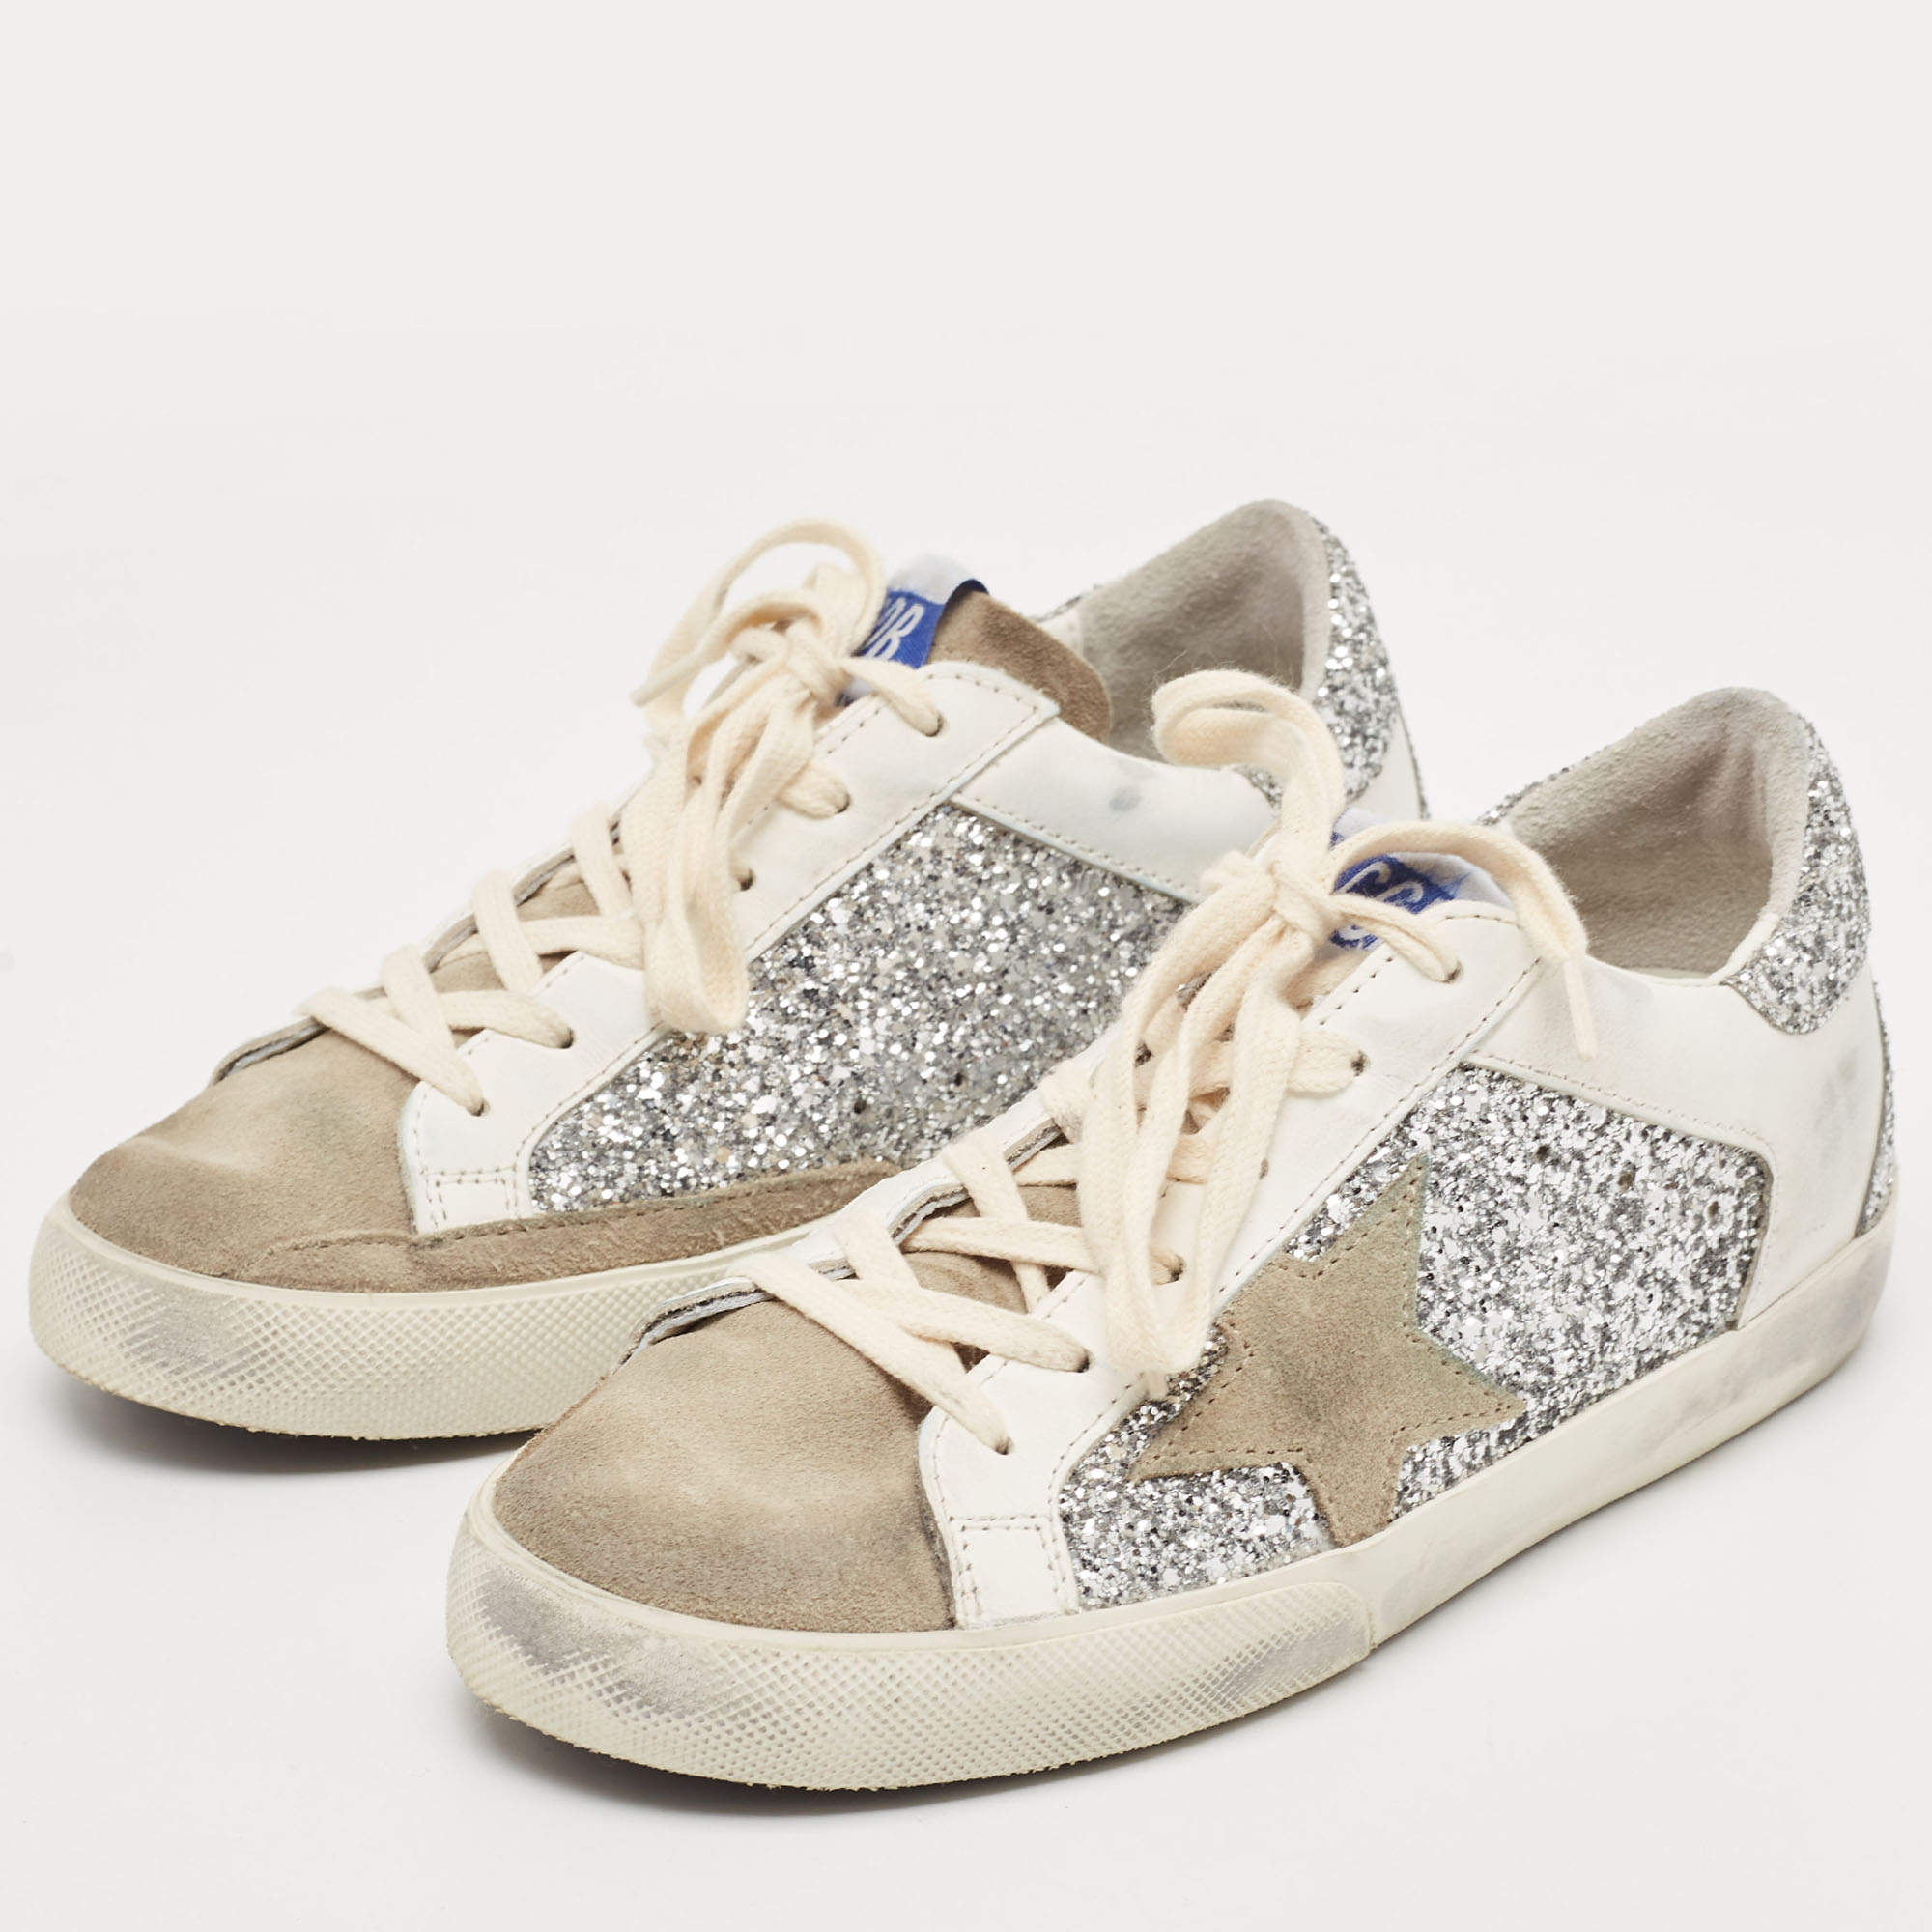 

Golden Goose White/Grey Suede and Leather Superstar Sneakers Size